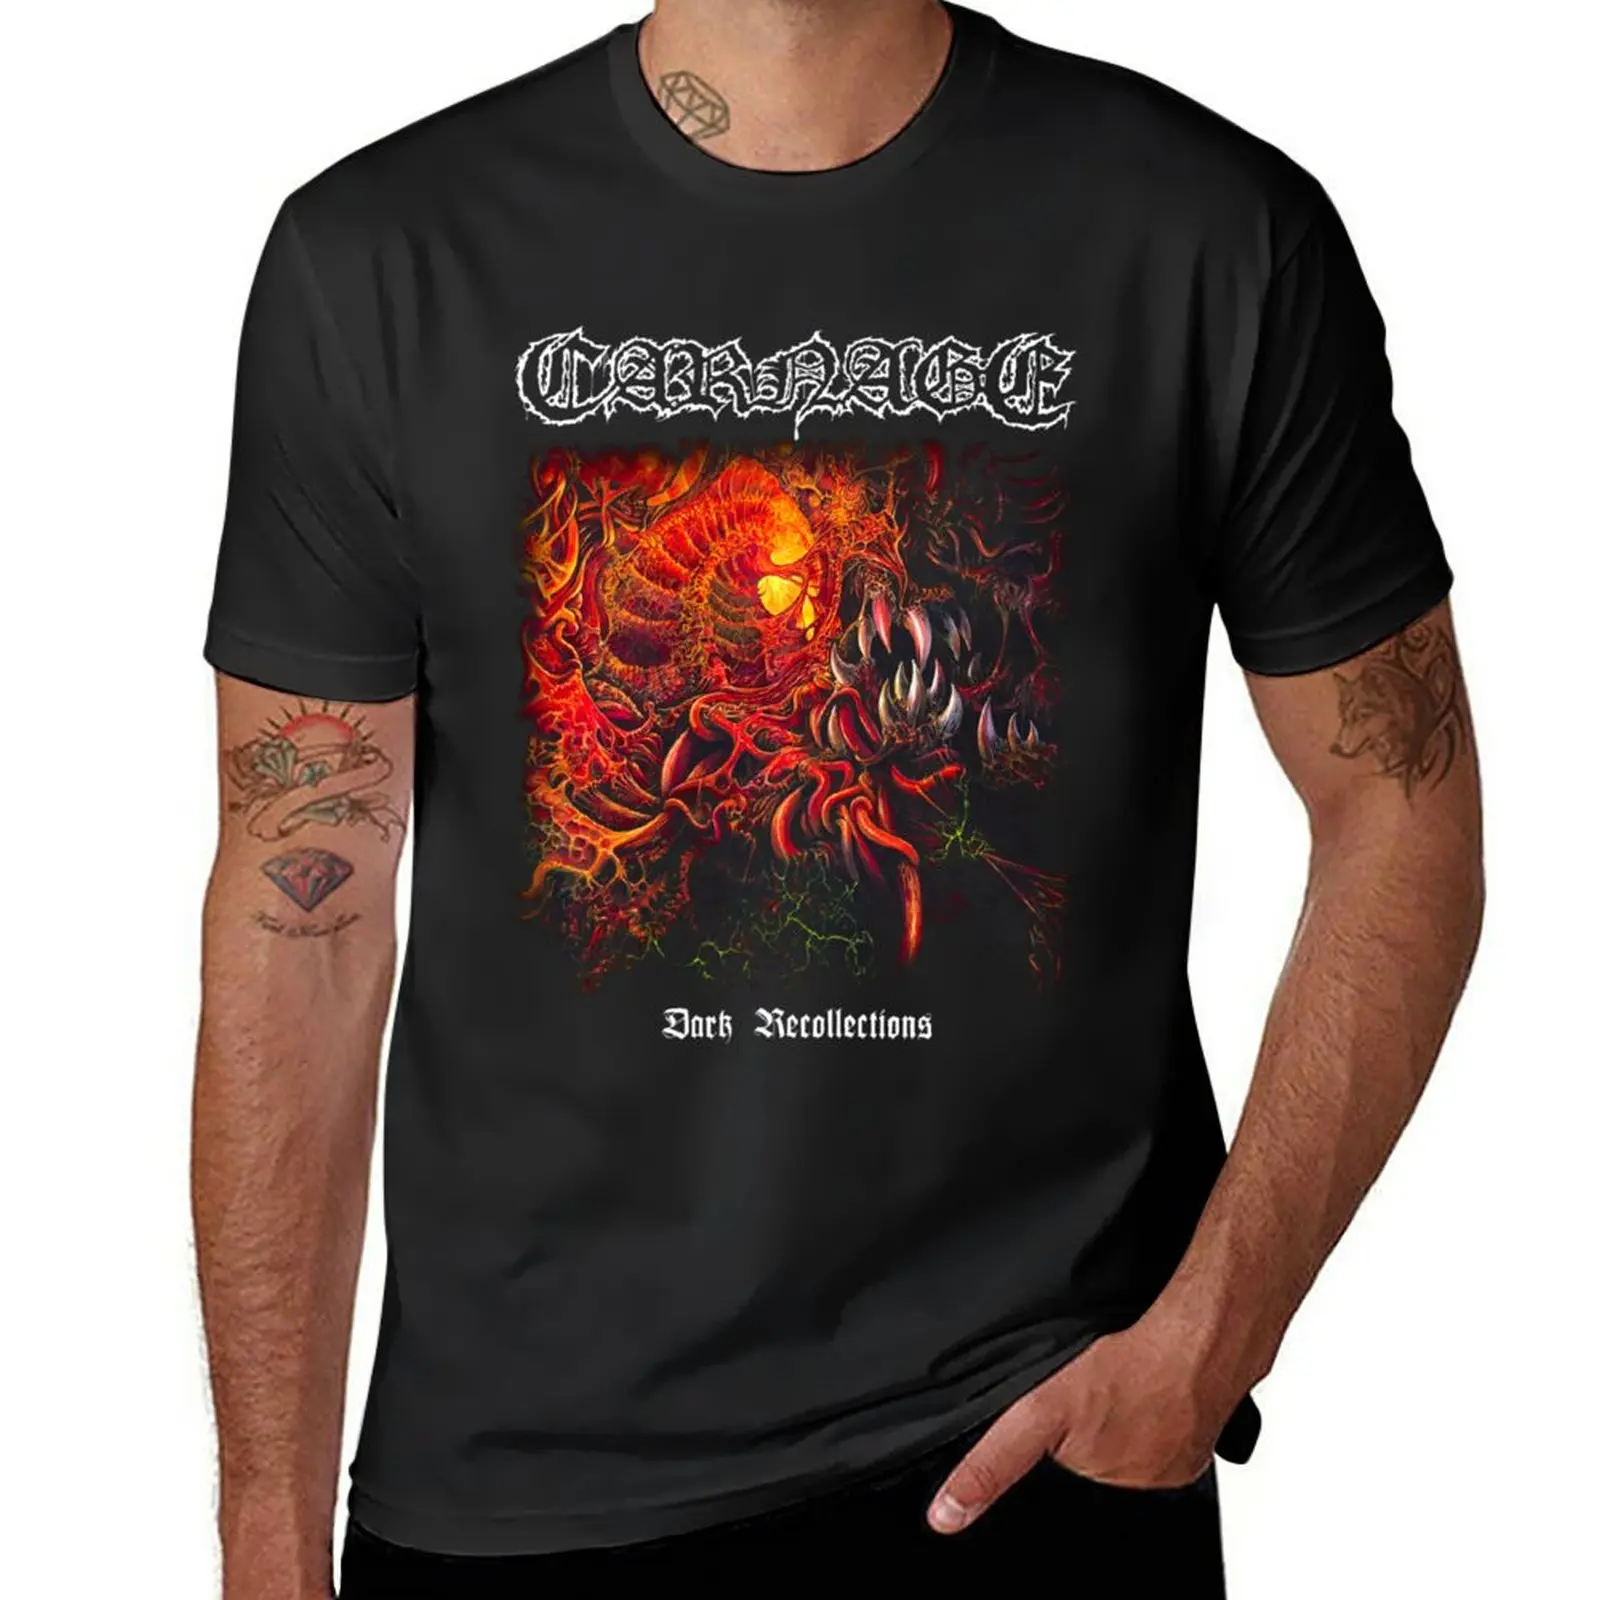 New Dark Recollections by Carnage - Classic Old School Death Metal T-Shirt t-shirts  man t shirt men - AliExpress